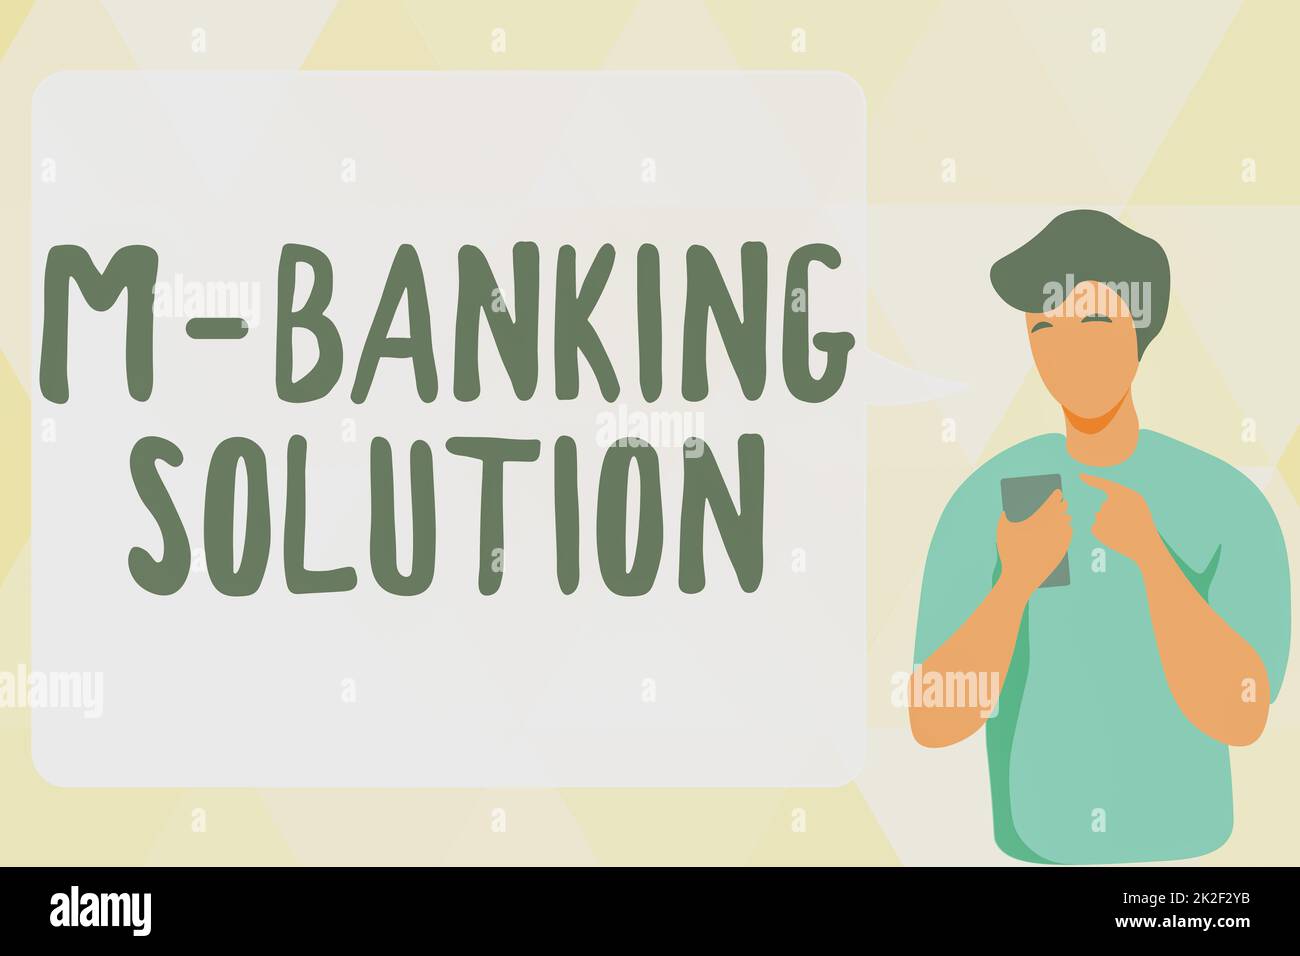 Conceptual caption M Banking Solution. Business approach accessed banking through an application on the smartphone Man Illustration Using Mobile And Displaying Speech Bubble Conversation. Stock Photo